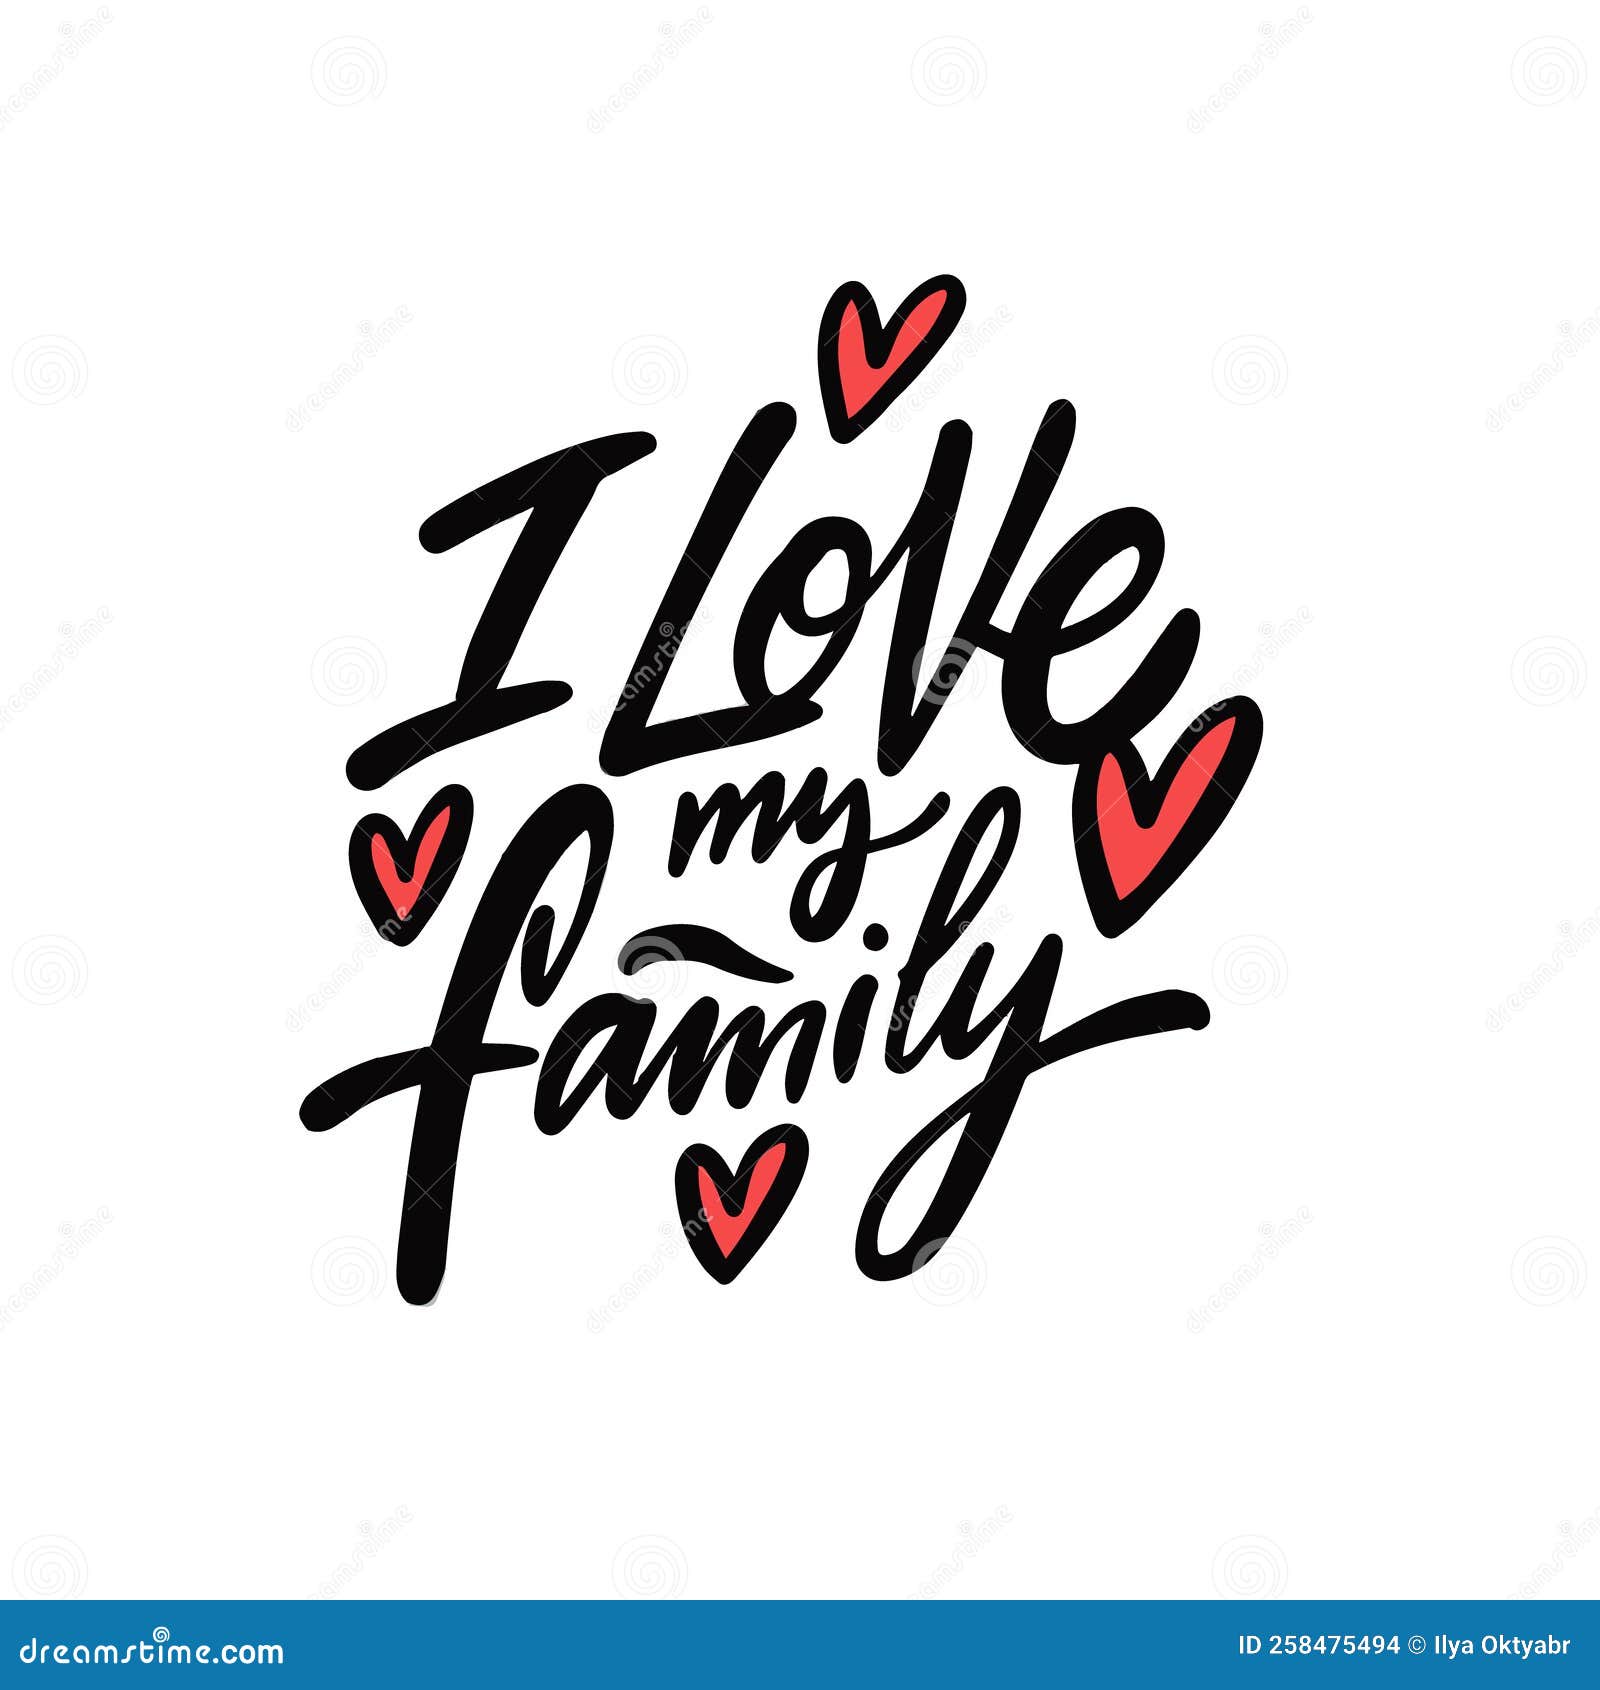 i love my family. hand drawn black color lettering phrase.